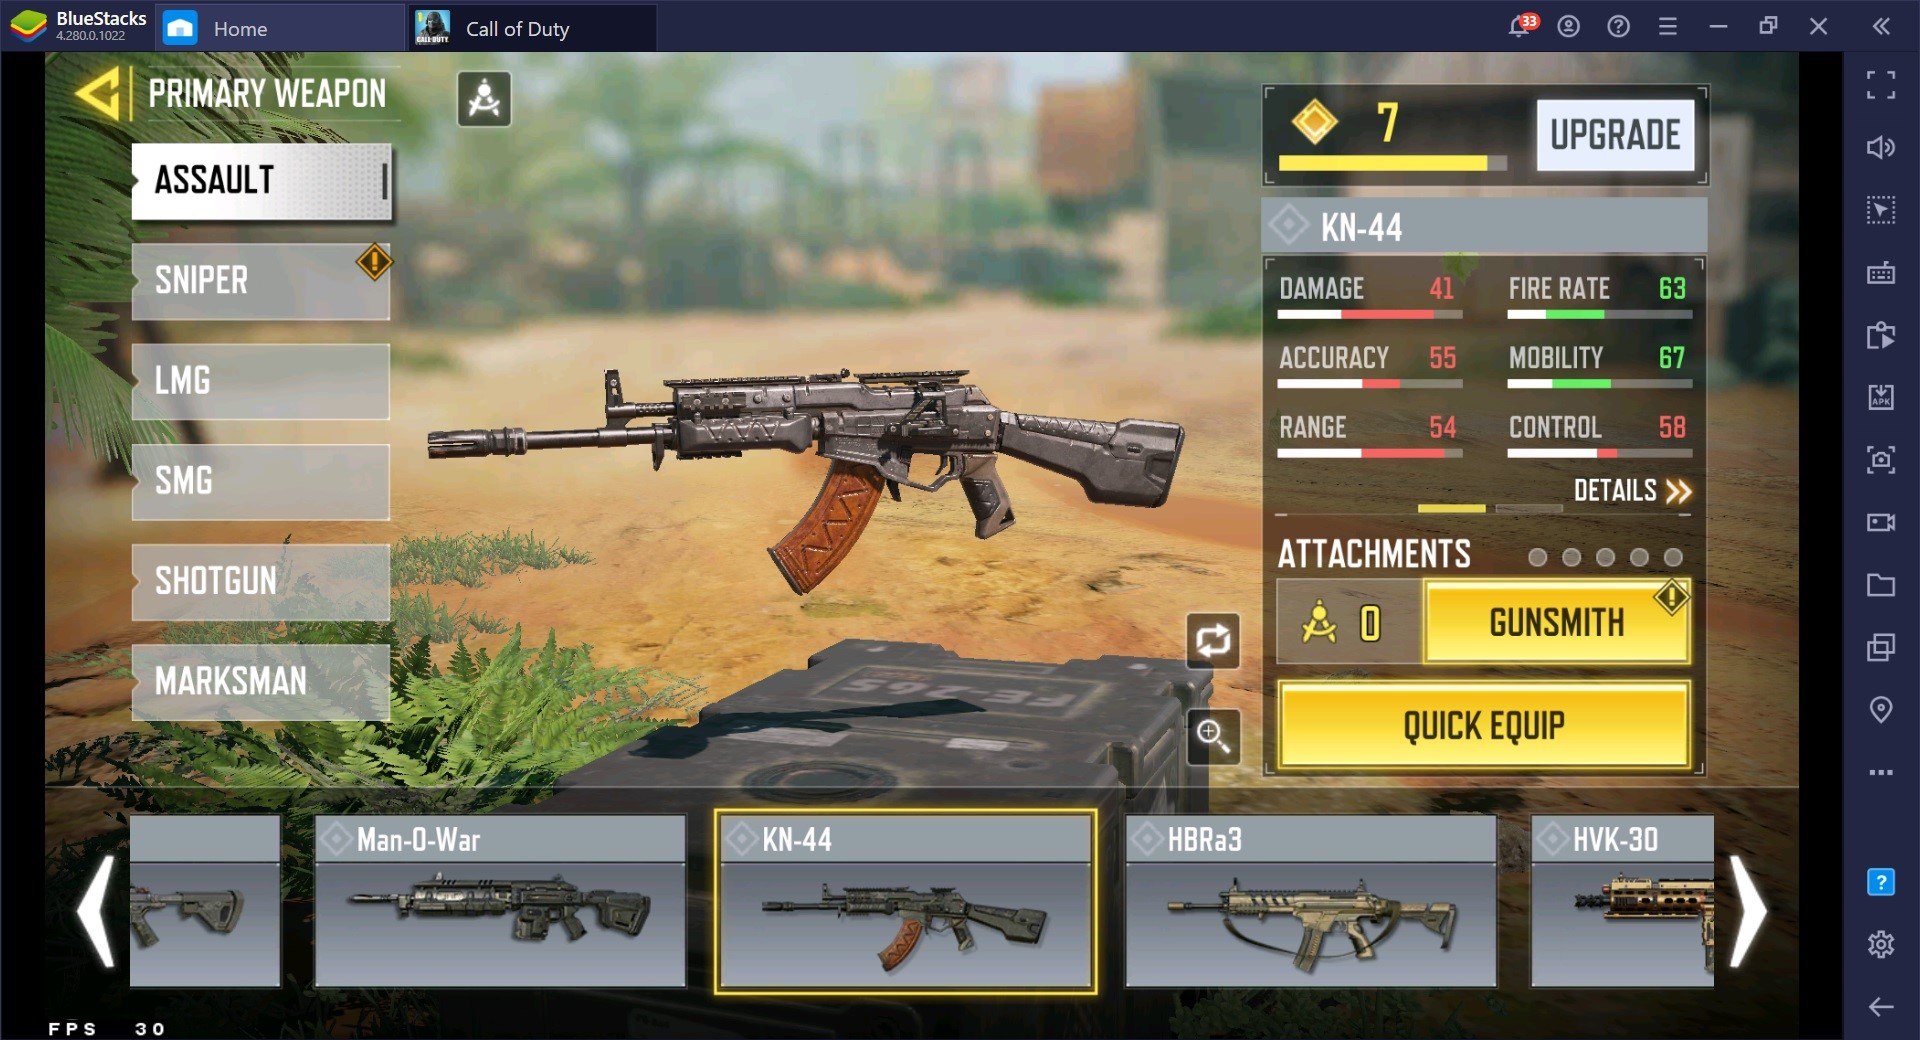 Call of Duty: Mobile Season 4 Weapon Guide for Battle Royale Games